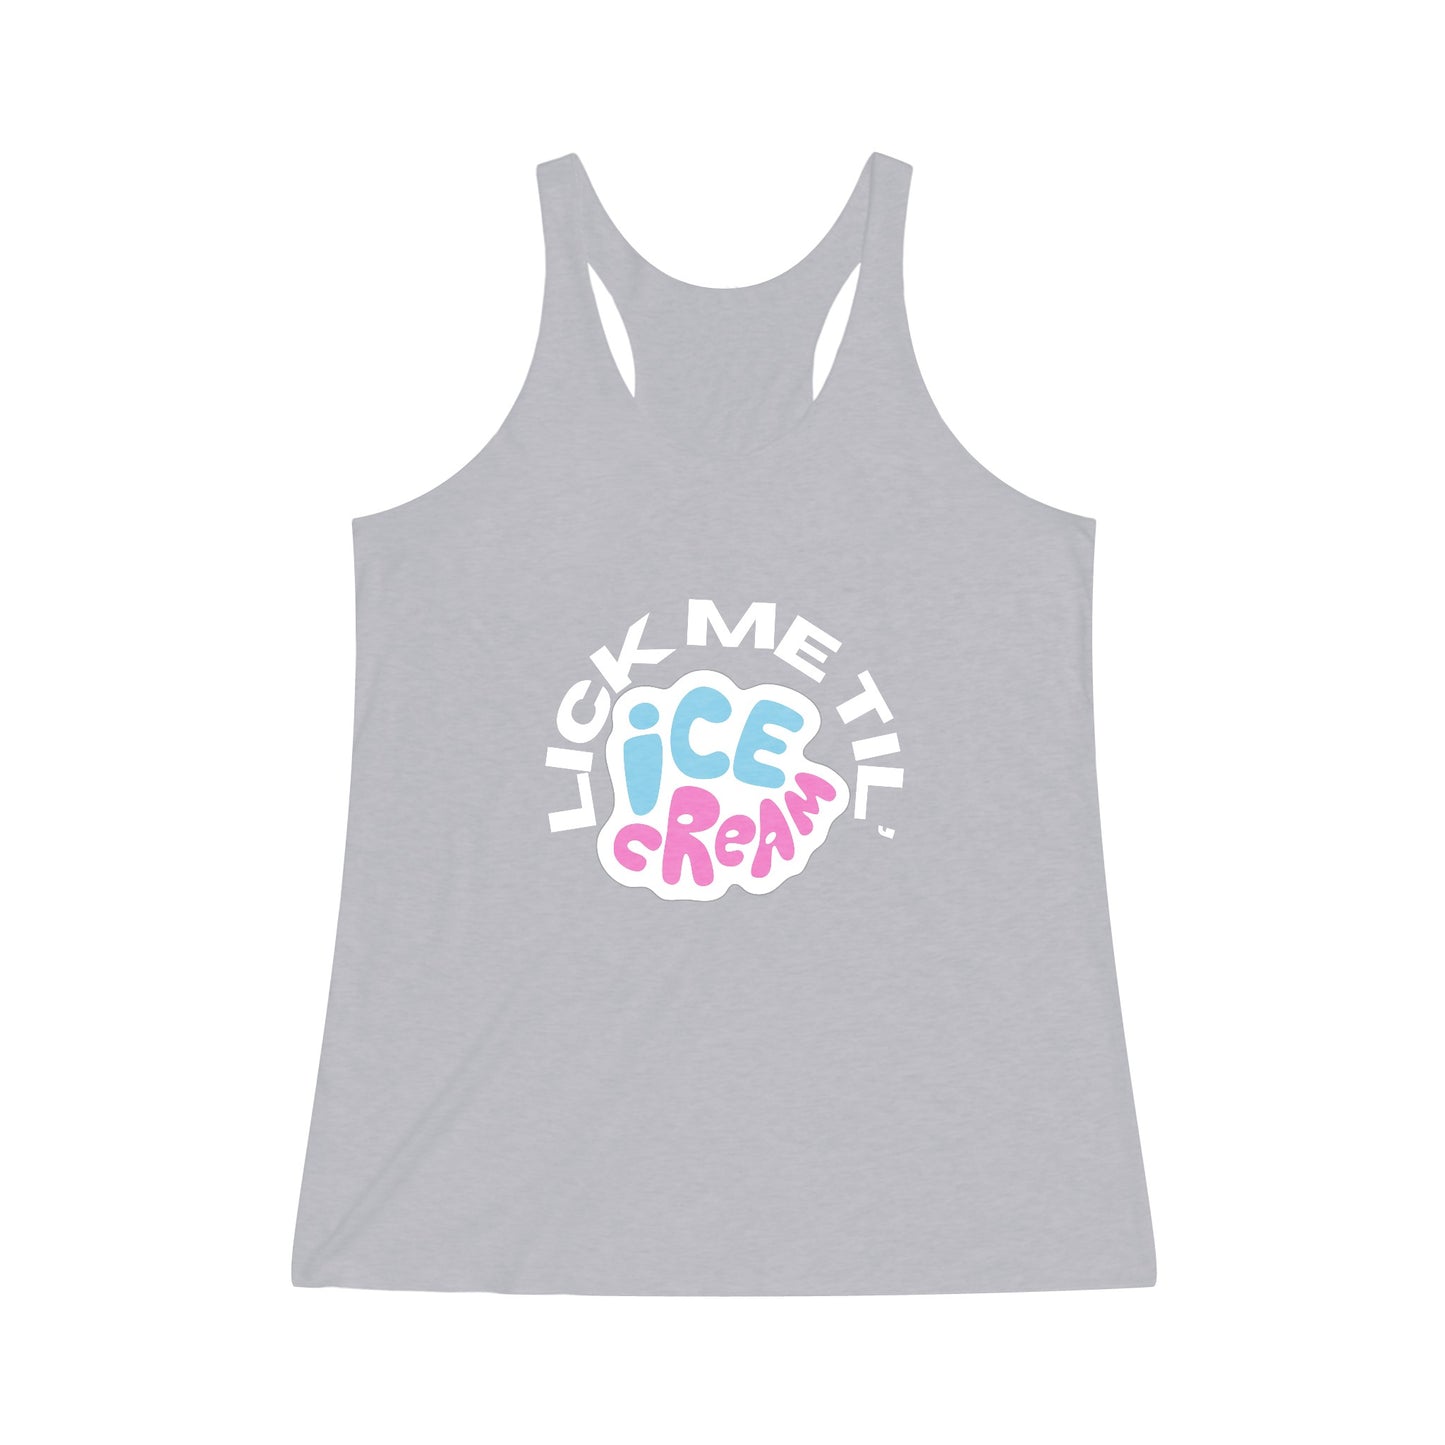 The Stamina for Men Lick me till Ice cream woman's fitted premium heather tank top product shot with white background